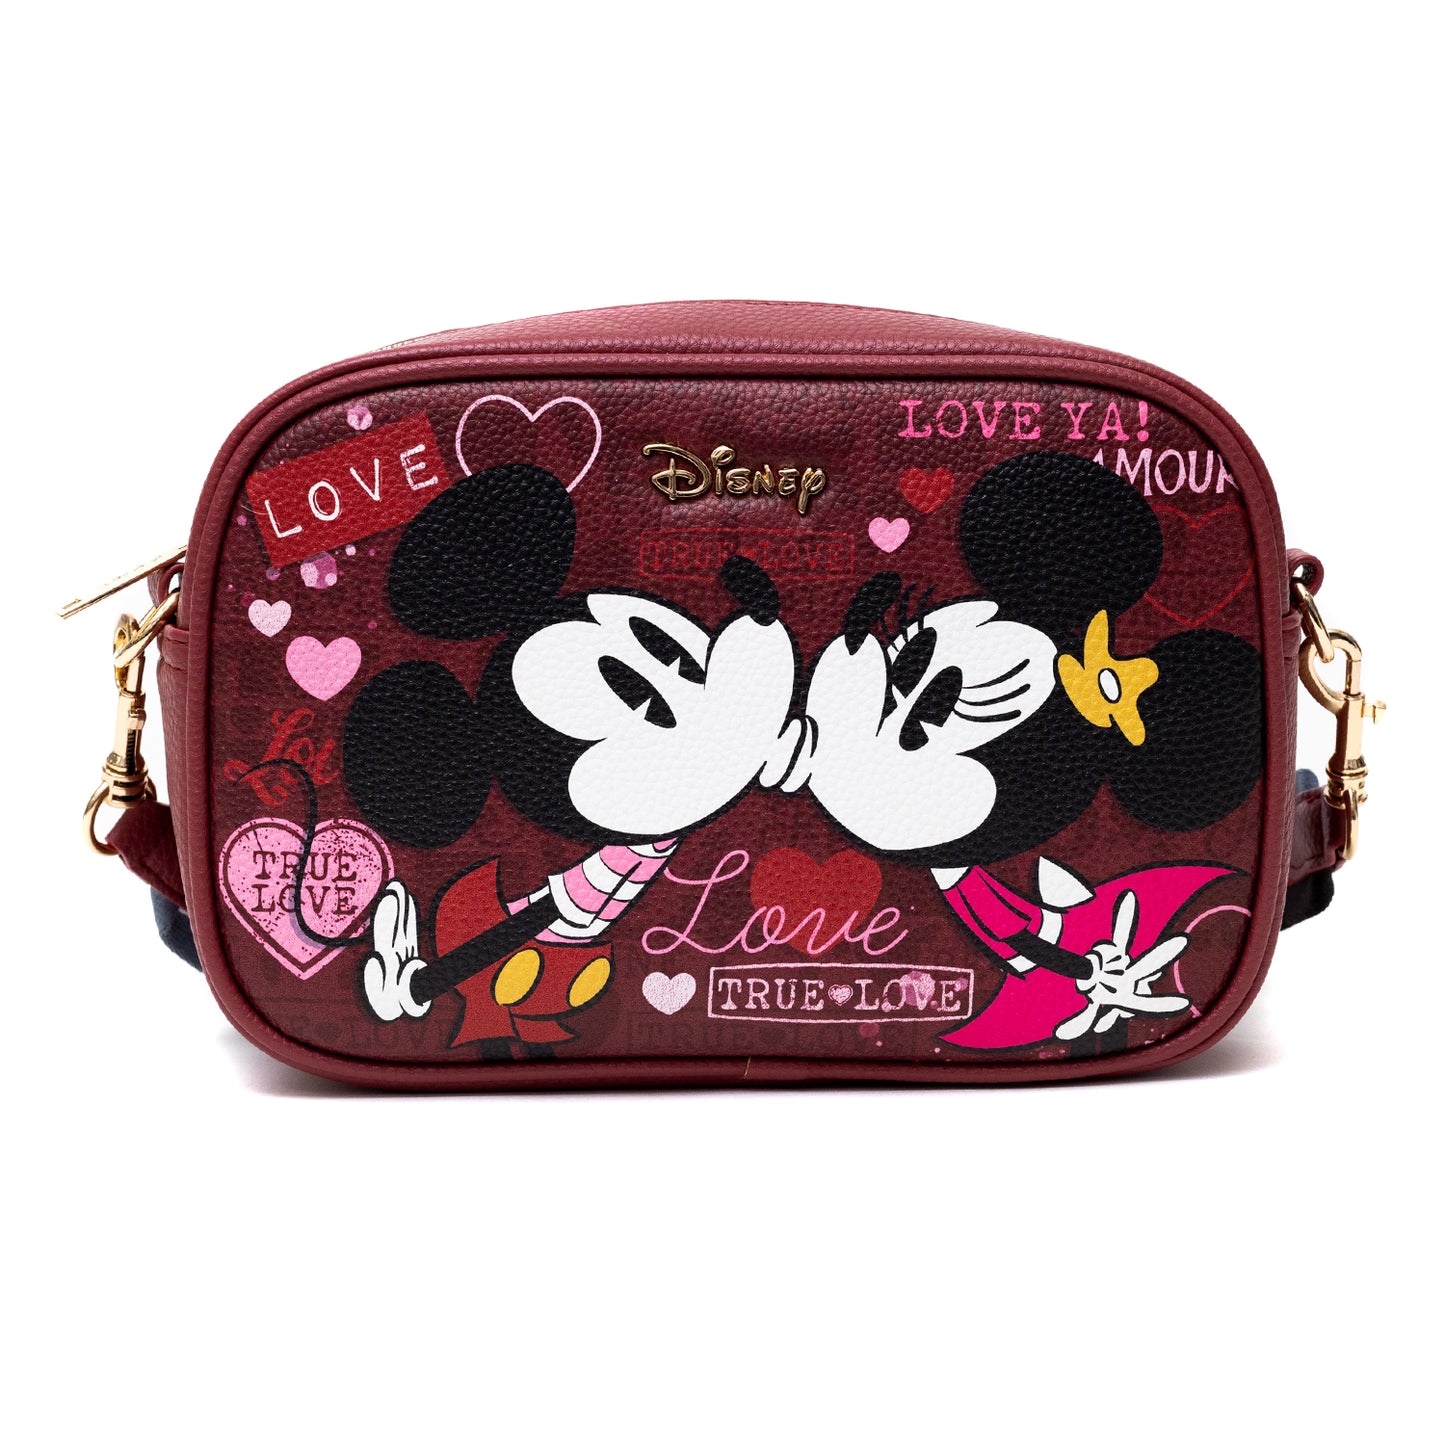 Coach Debuts New Collection With Disney, Featuring Mickey Mouse Bags,  Accessories and More - PurseBlog | Bags, Disney bag, Disney accessories